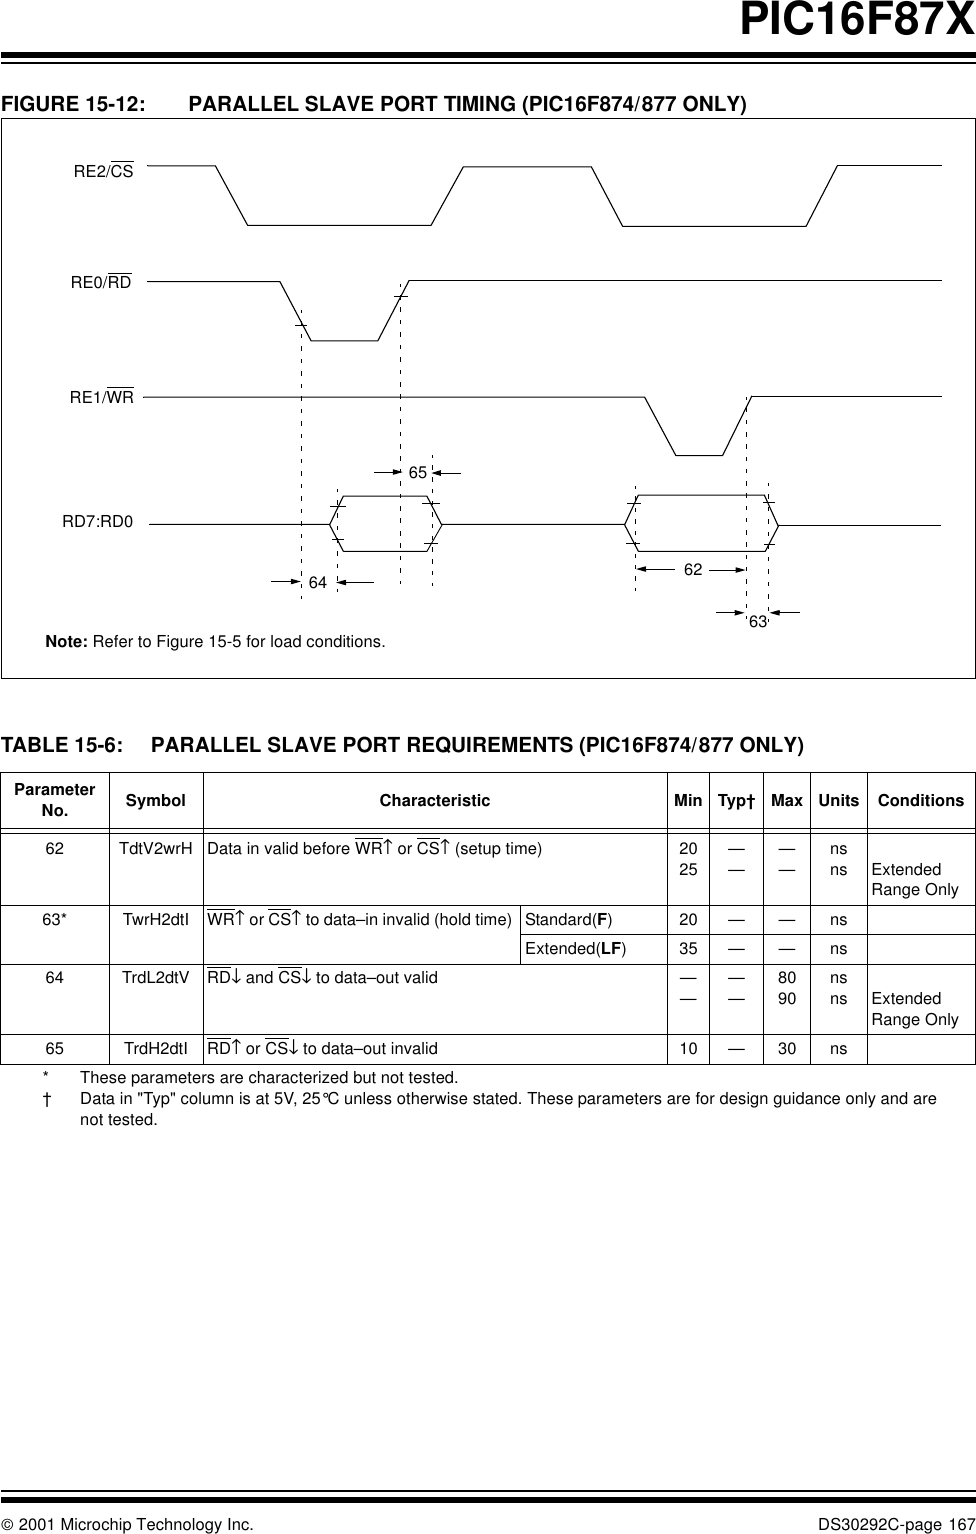  2001 Microchip Technology Inc. DS30292C-page 167PIC16F87XFIGURE 15-12: PARALLEL SLAVE PORT TIMING (PIC16F874/877 ONLY)TABLE 15-6: PARALLEL SLAVE PORT REQUIREMENTS (PIC16F874/877 ONLY)Note: Refer to Figure 15-5 for load conditions.RE2/CSRE0/RDRE1/WRRD7:RD062636465Parameter No. Symbol Characteristic Min Typ†Max Units Conditions62 TdtV2wrH Data in valid before WR↑ or CS↑ (setup time) 2025————nsns Extended Range Only63* TwrH2dtI WR↑ or CS↑ to data–in invalid (hold time)  Standard(F)20——ns  Extended(LF)35——ns64 TrdL2dtV RD↓ and CS↓ to data–out valid ————8090nsns Extended Range Only65 TrdH2dtI RD↑ or CS↓ to data–out invalid 10 —30 ns* These parameters are characterized but not tested.†Data in &quot;Typ&quot; column is at 5V, 25°C unless otherwise stated. These parameters are for design guidance only and are not tested.